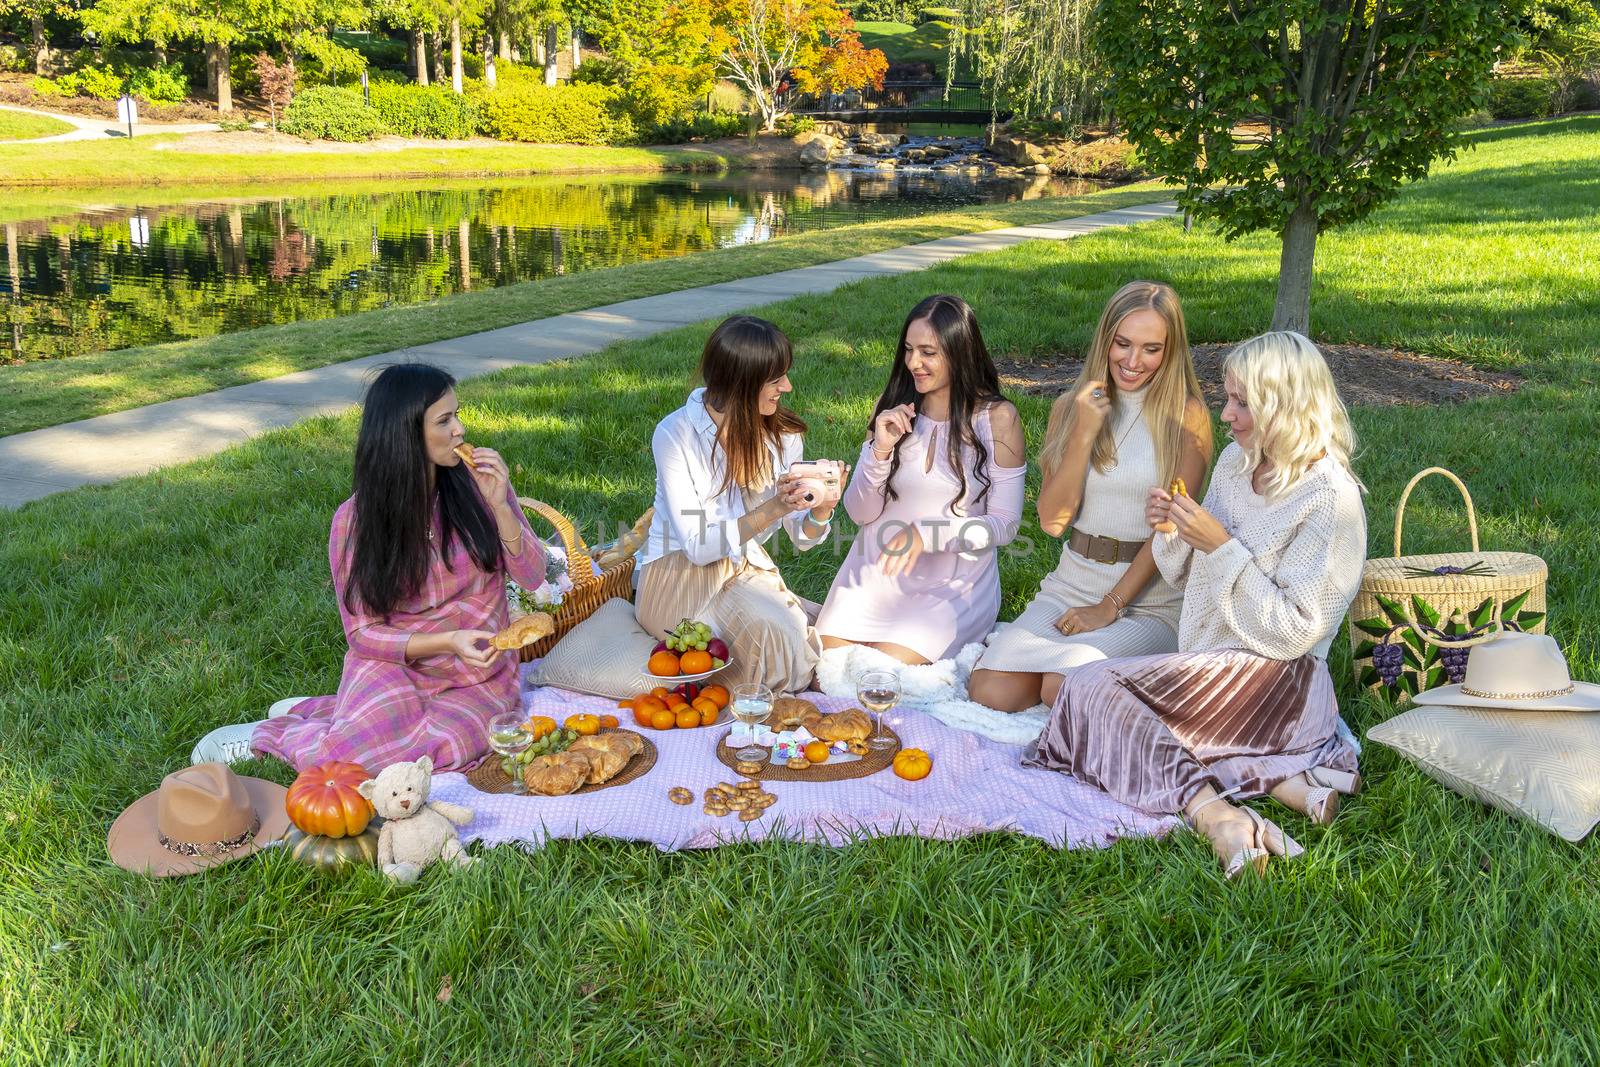 A group of beautiful women enjoy a picnic on a fall day outdoors